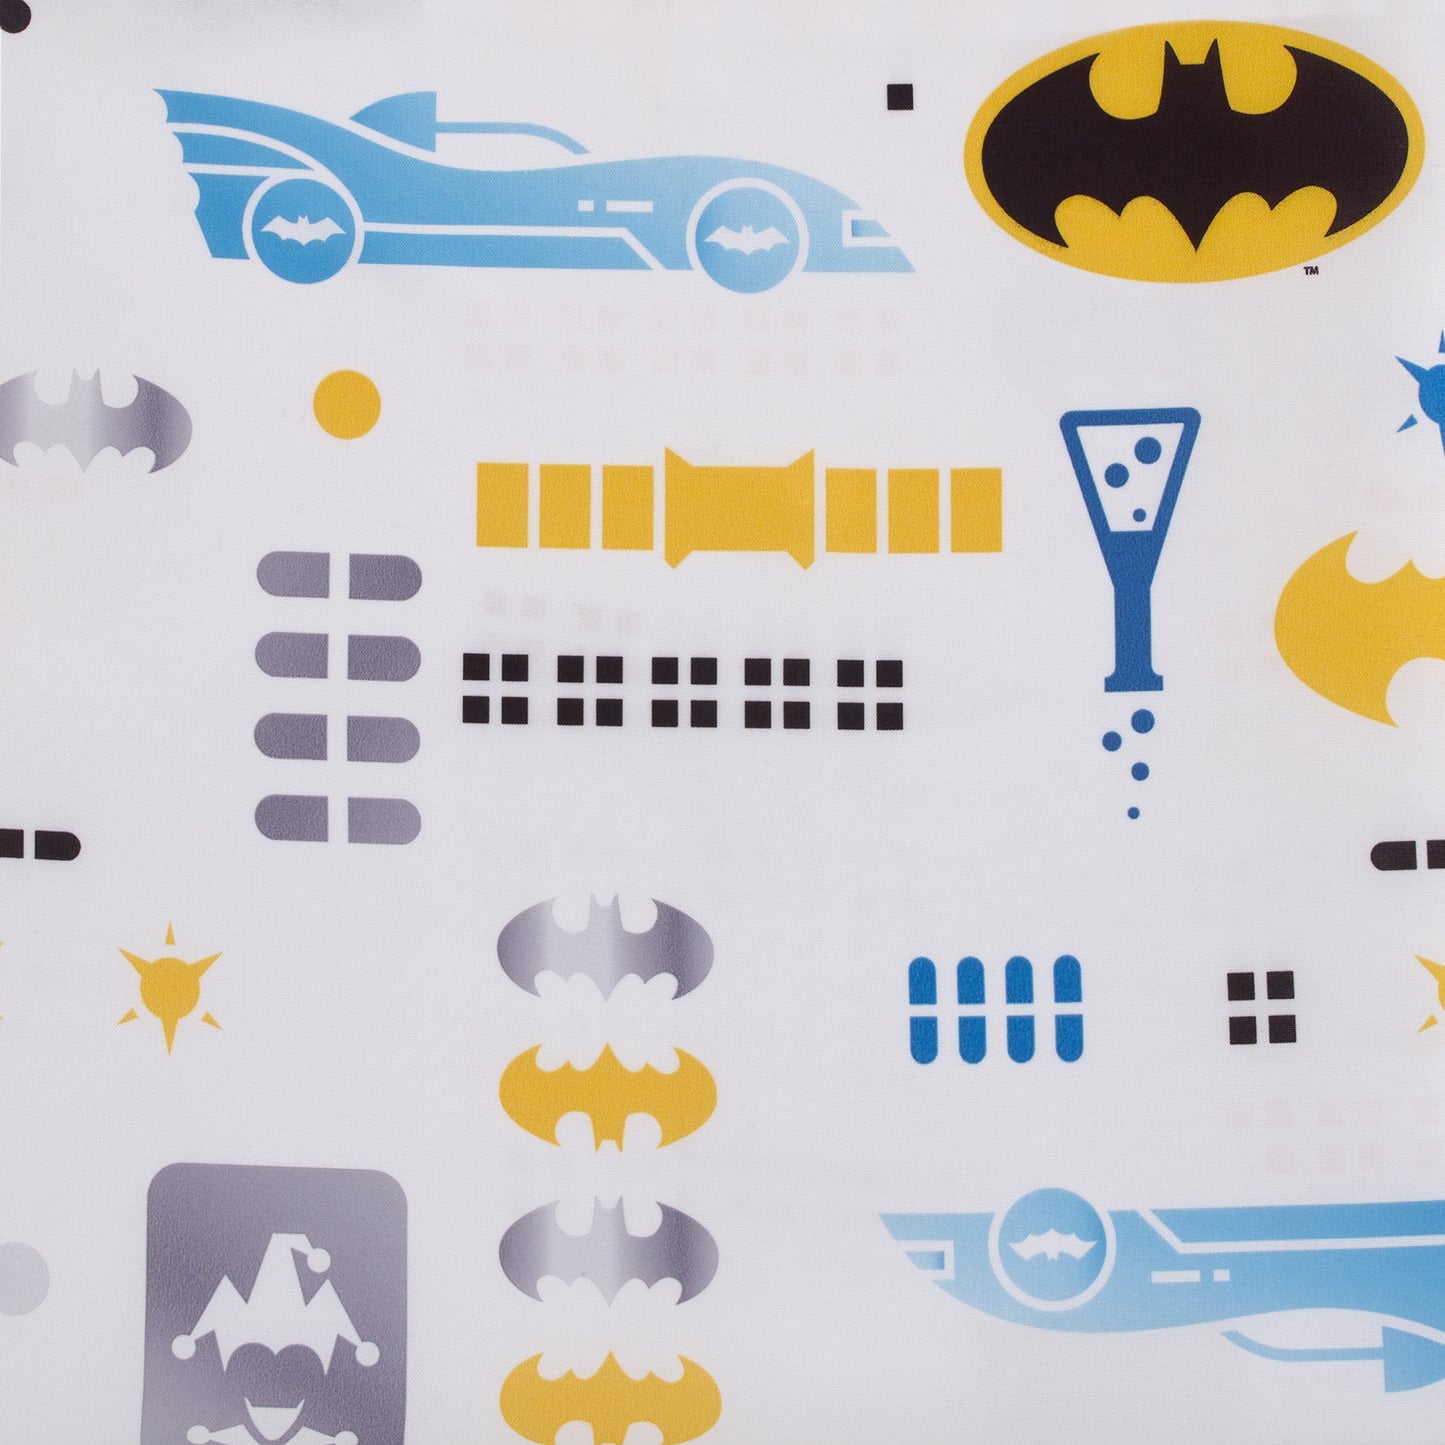 Warner Brothers Batman The Caped Crusader Blue, Yellow and White Bat-Signal and Batmobile Deluxe Easy Fold Toddler Nap Mat